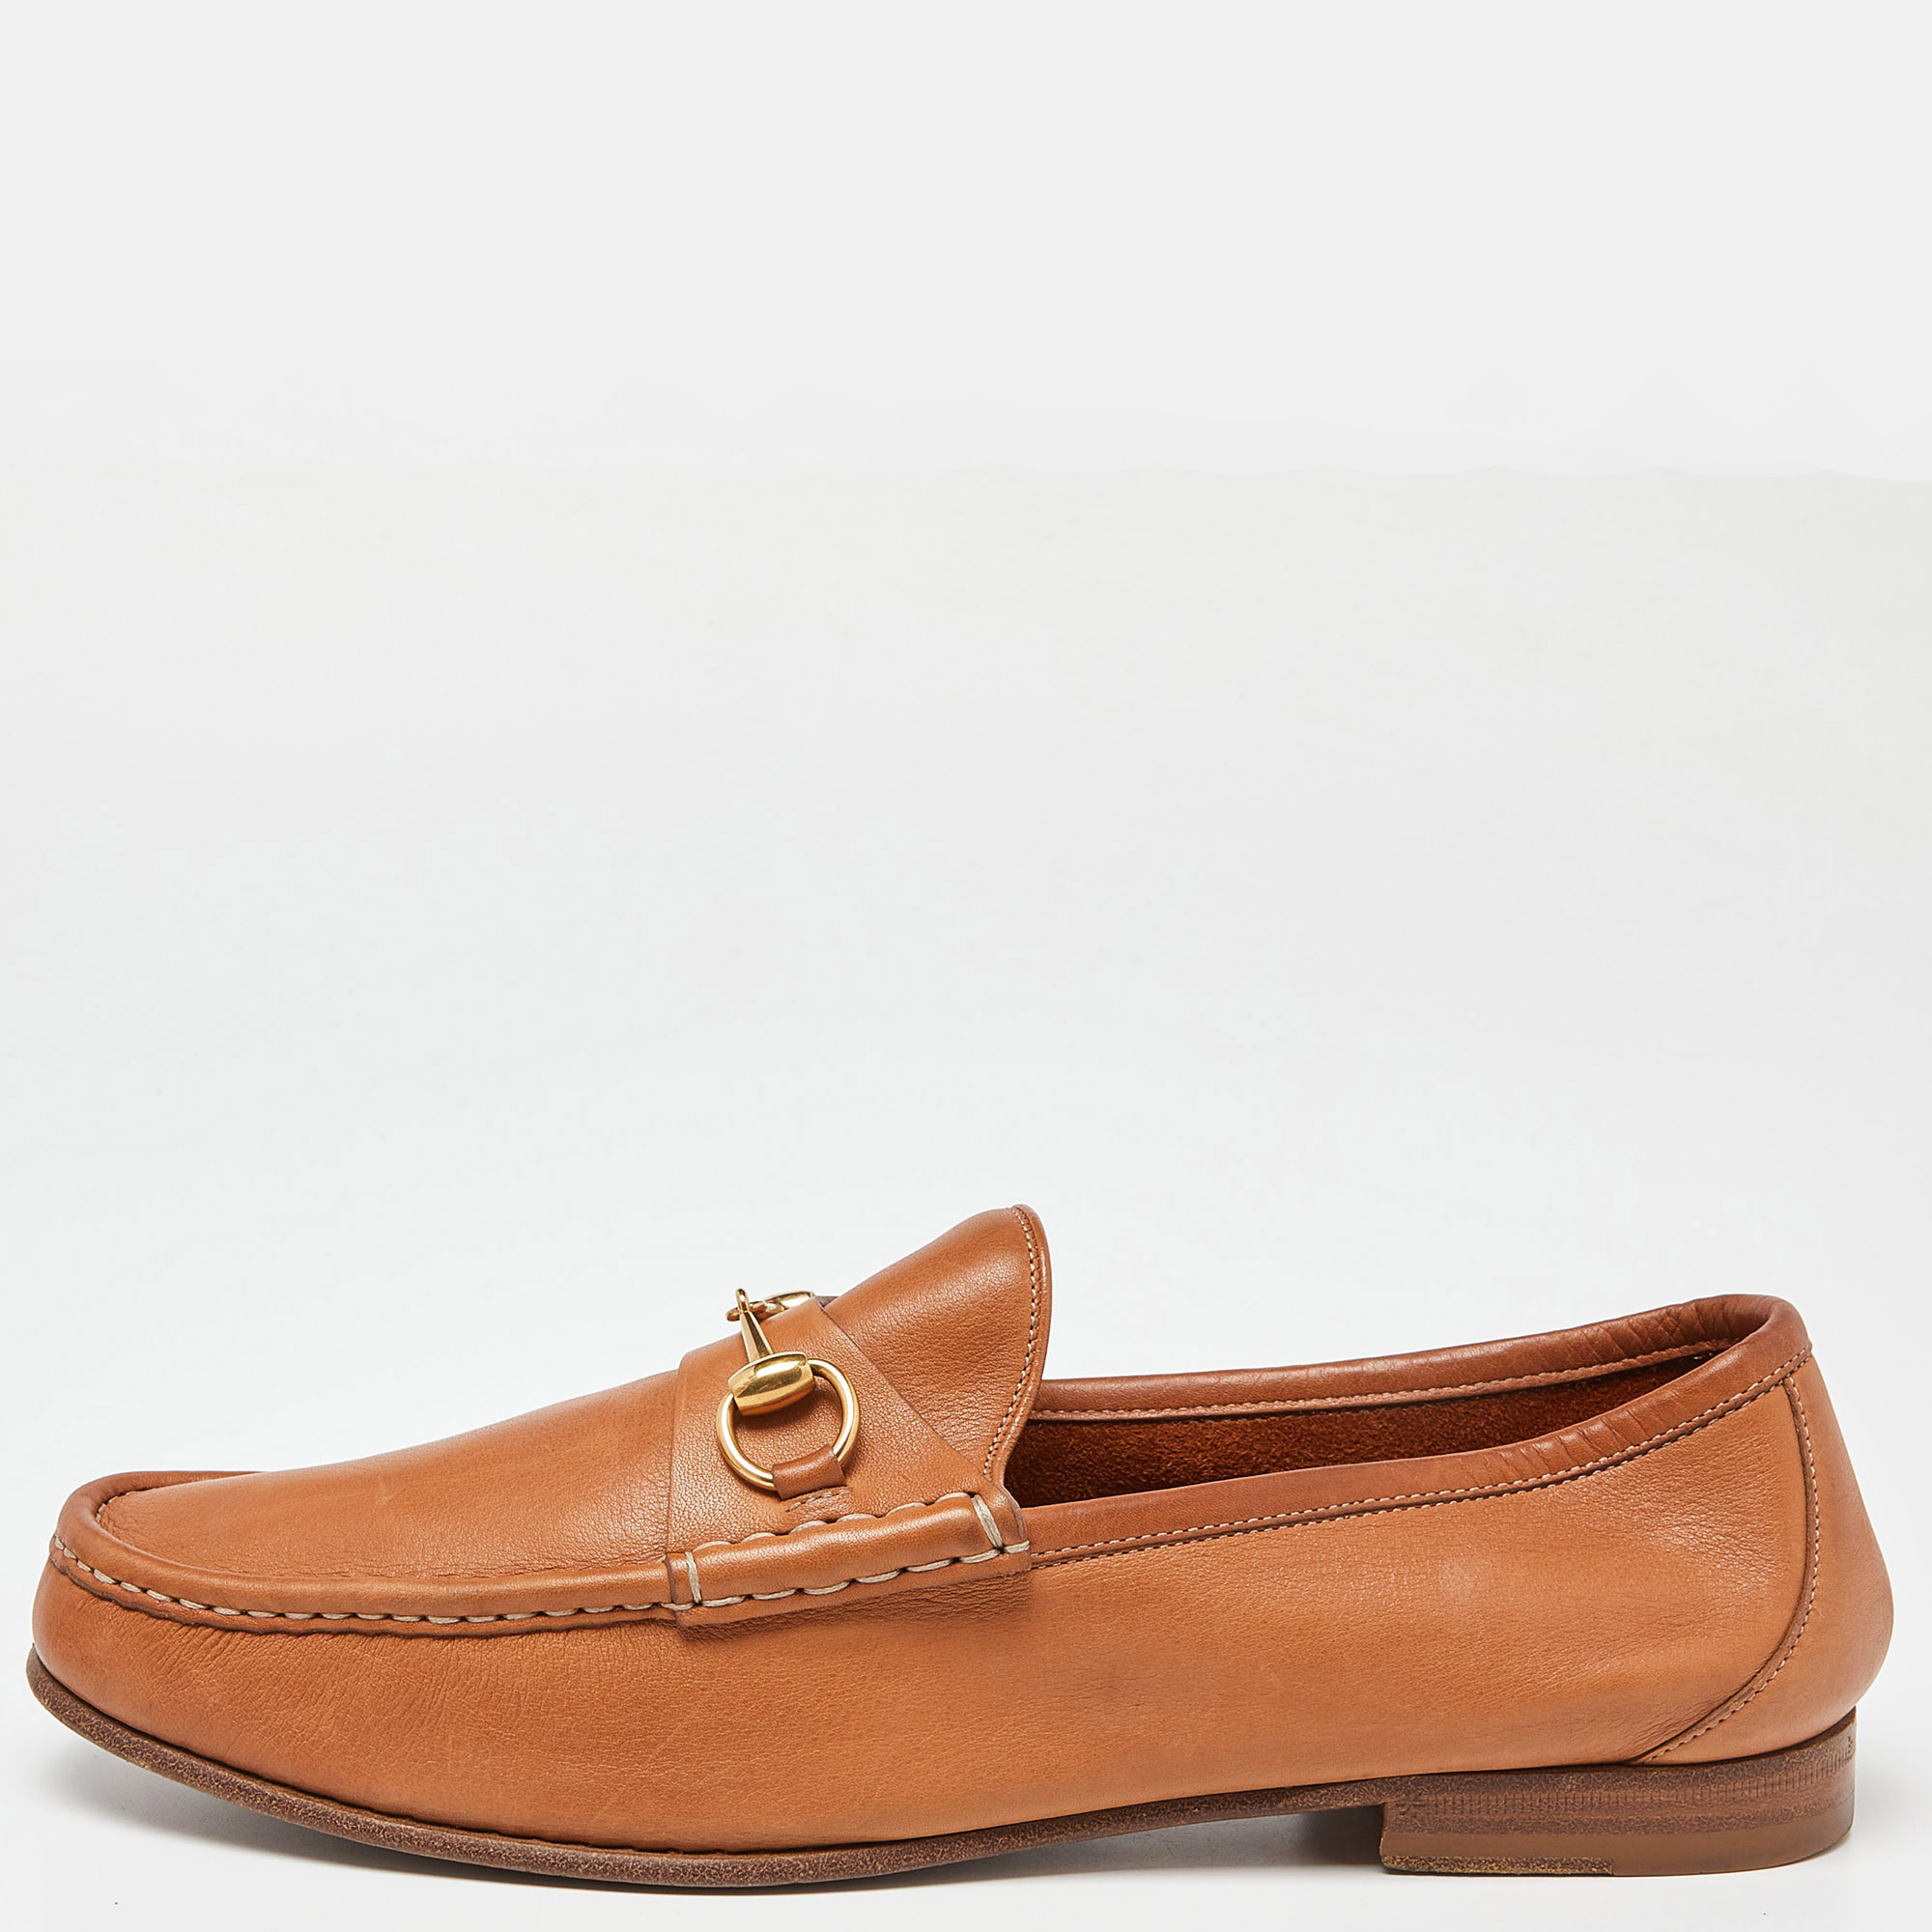 Gucci Tan Leather Horsebit Loafers Size 45